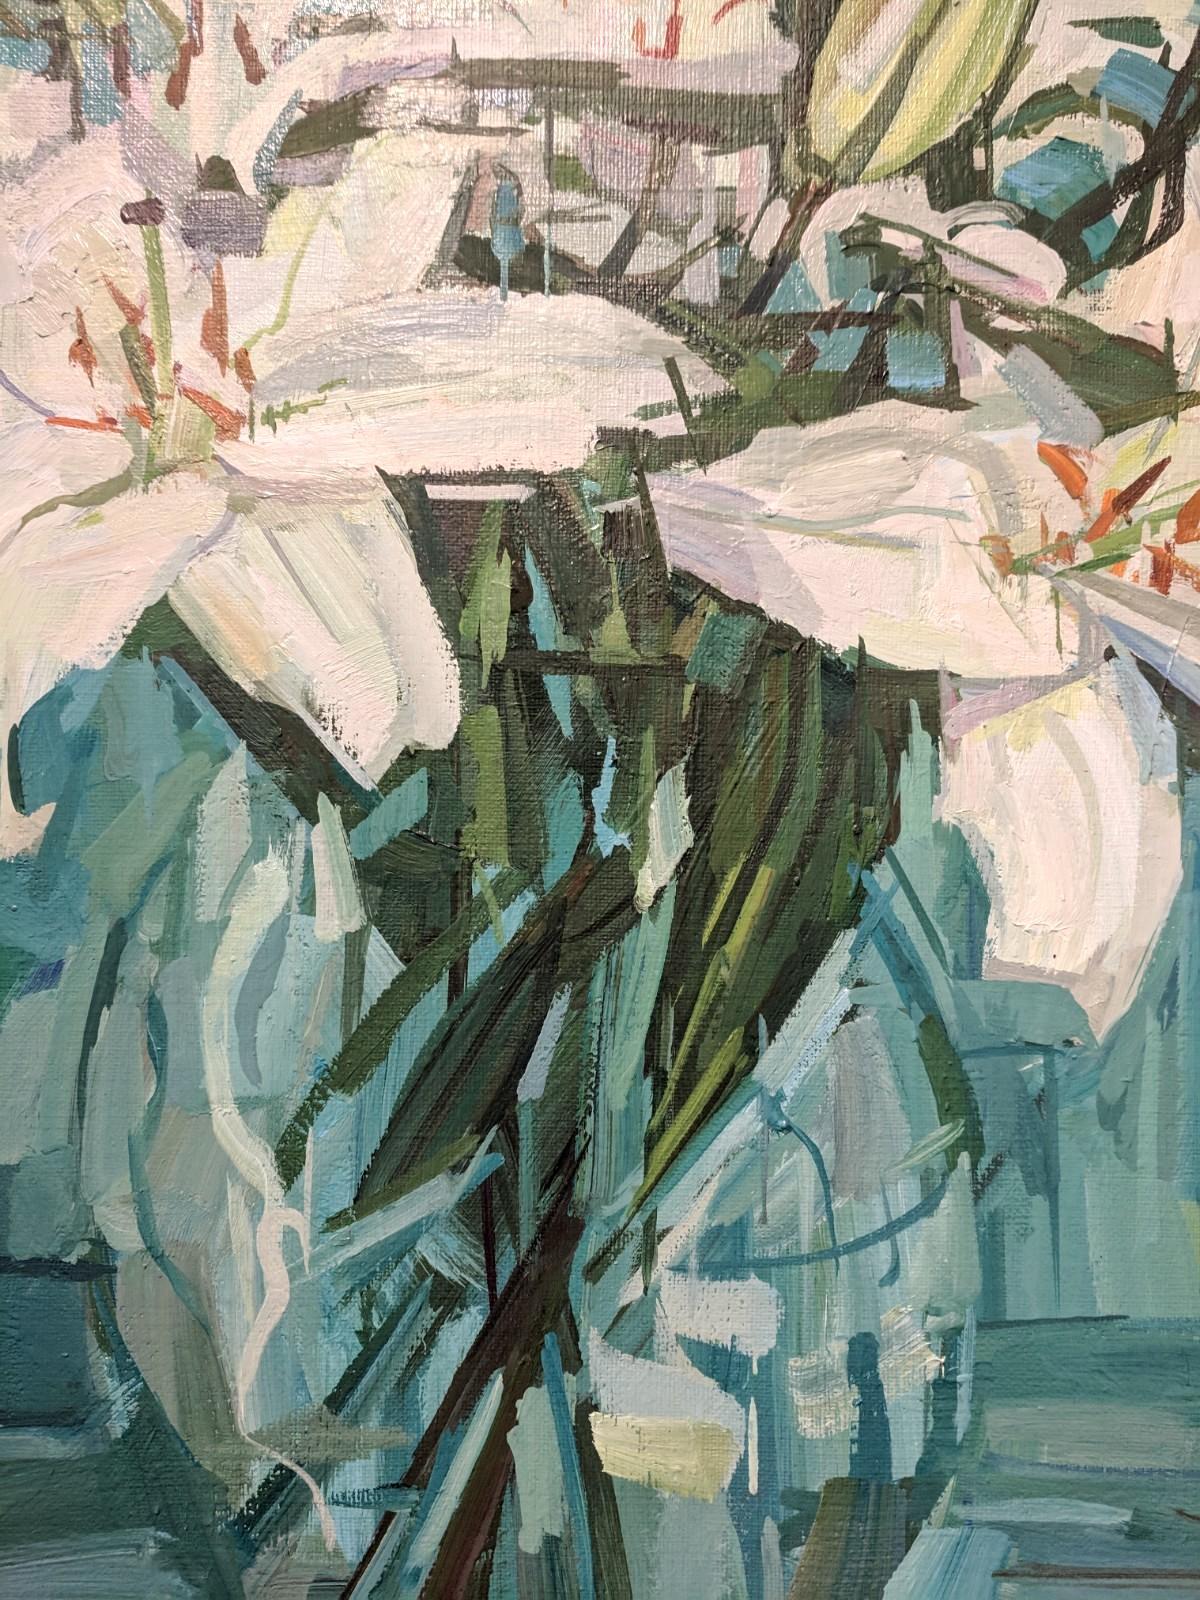 White Lilies, Flowers in Vase, Teal Blue, Green, White Botanical Still Life - Contemporary Painting by Francis Sills